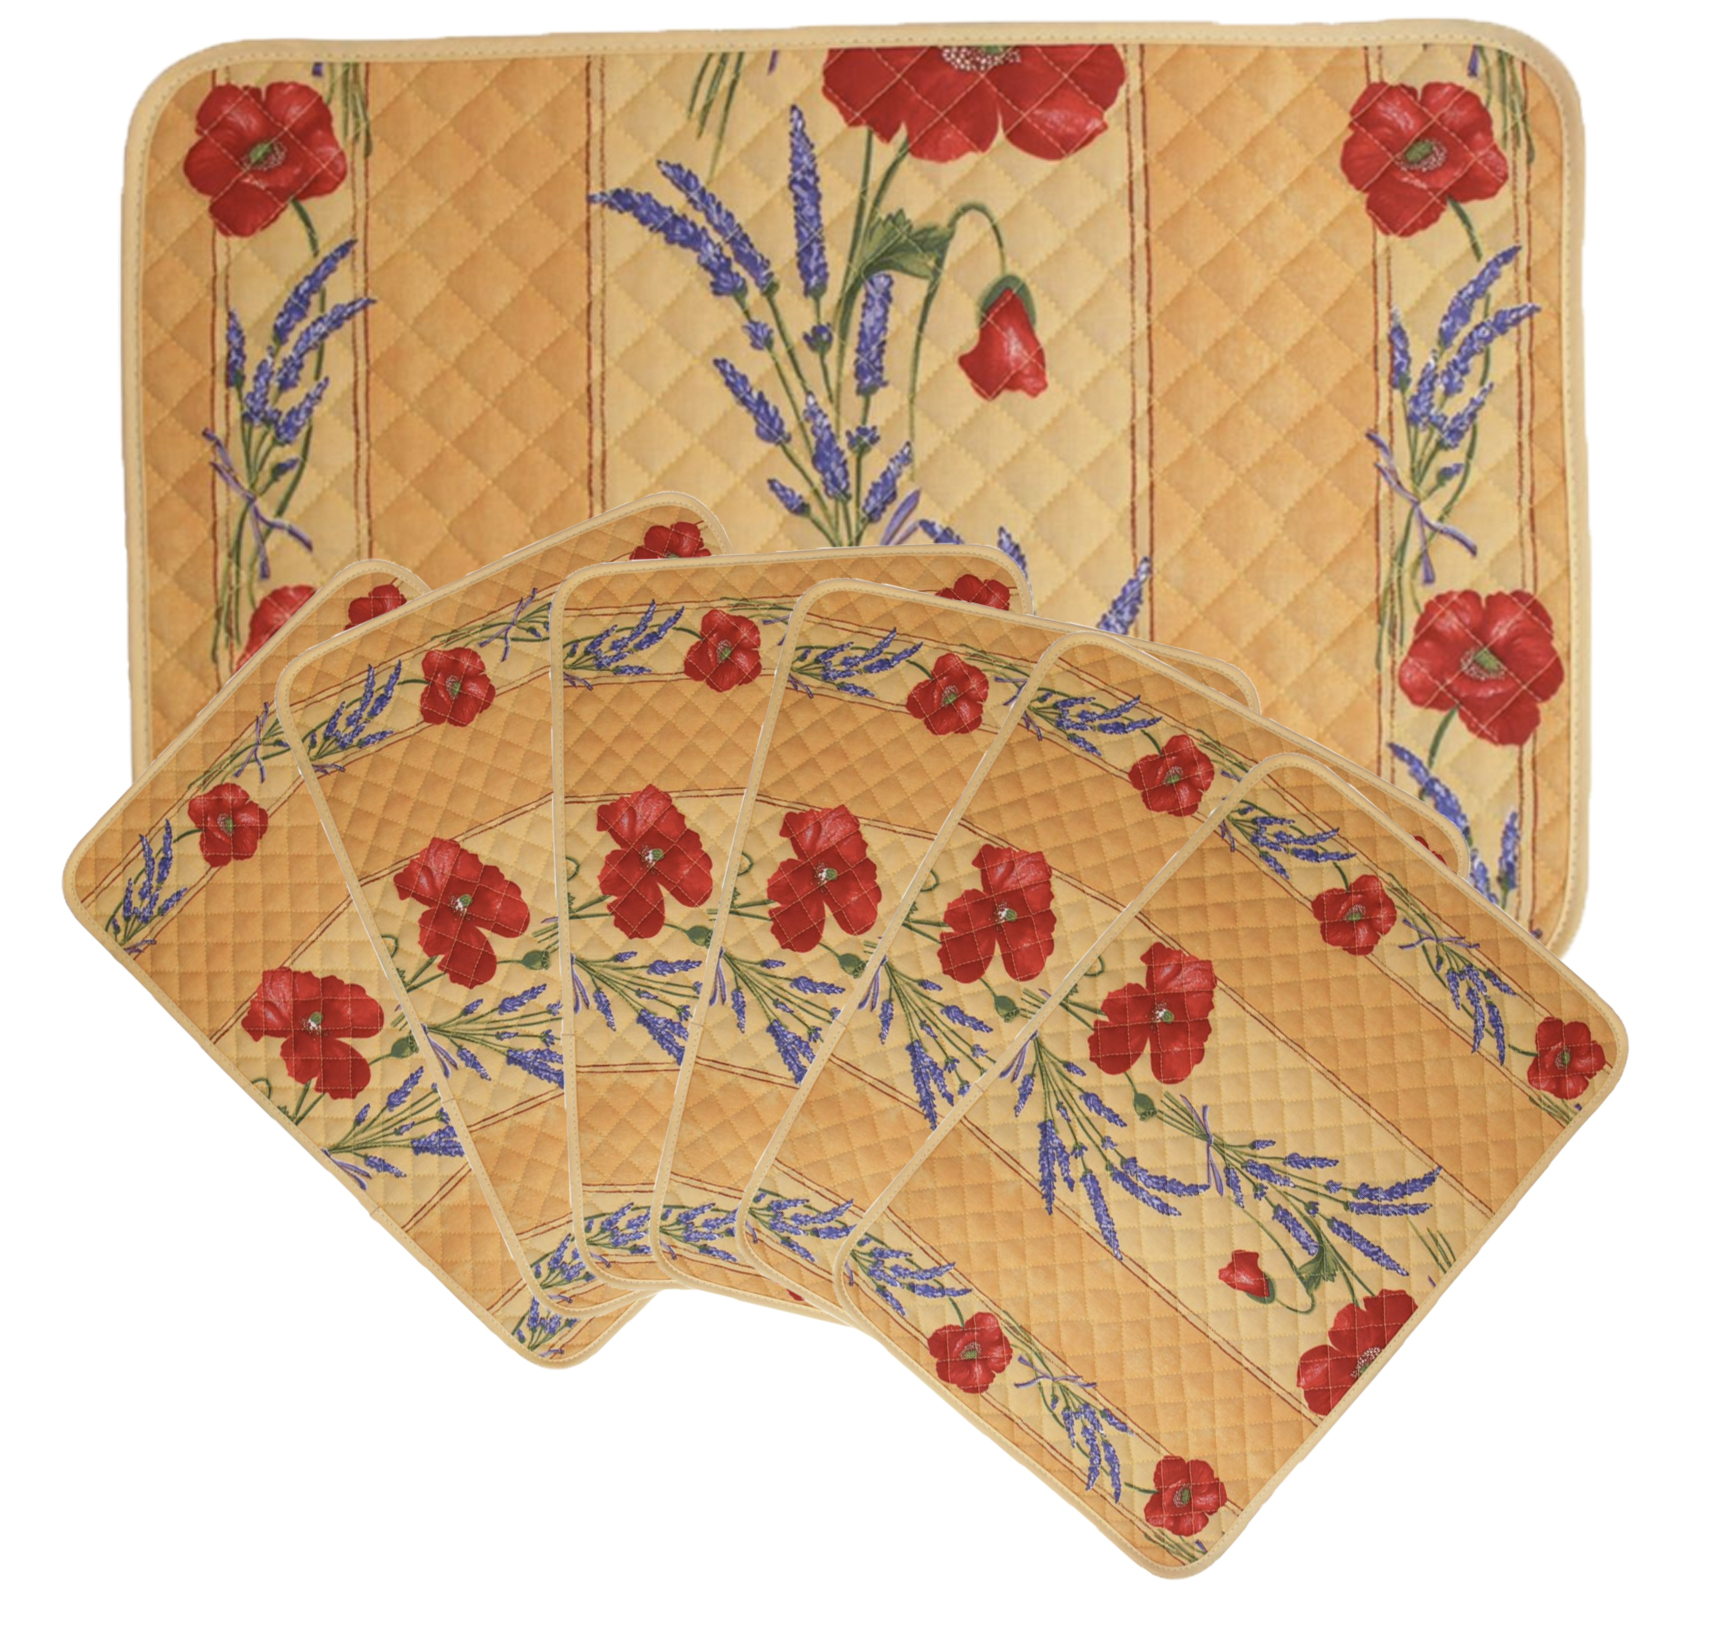 French Acrylic Coated Placemats Collection "Coquelicot" Yellow: Poppies & Lavender Motif, Size 17" x 11", Price $94.95 for a Set of 6